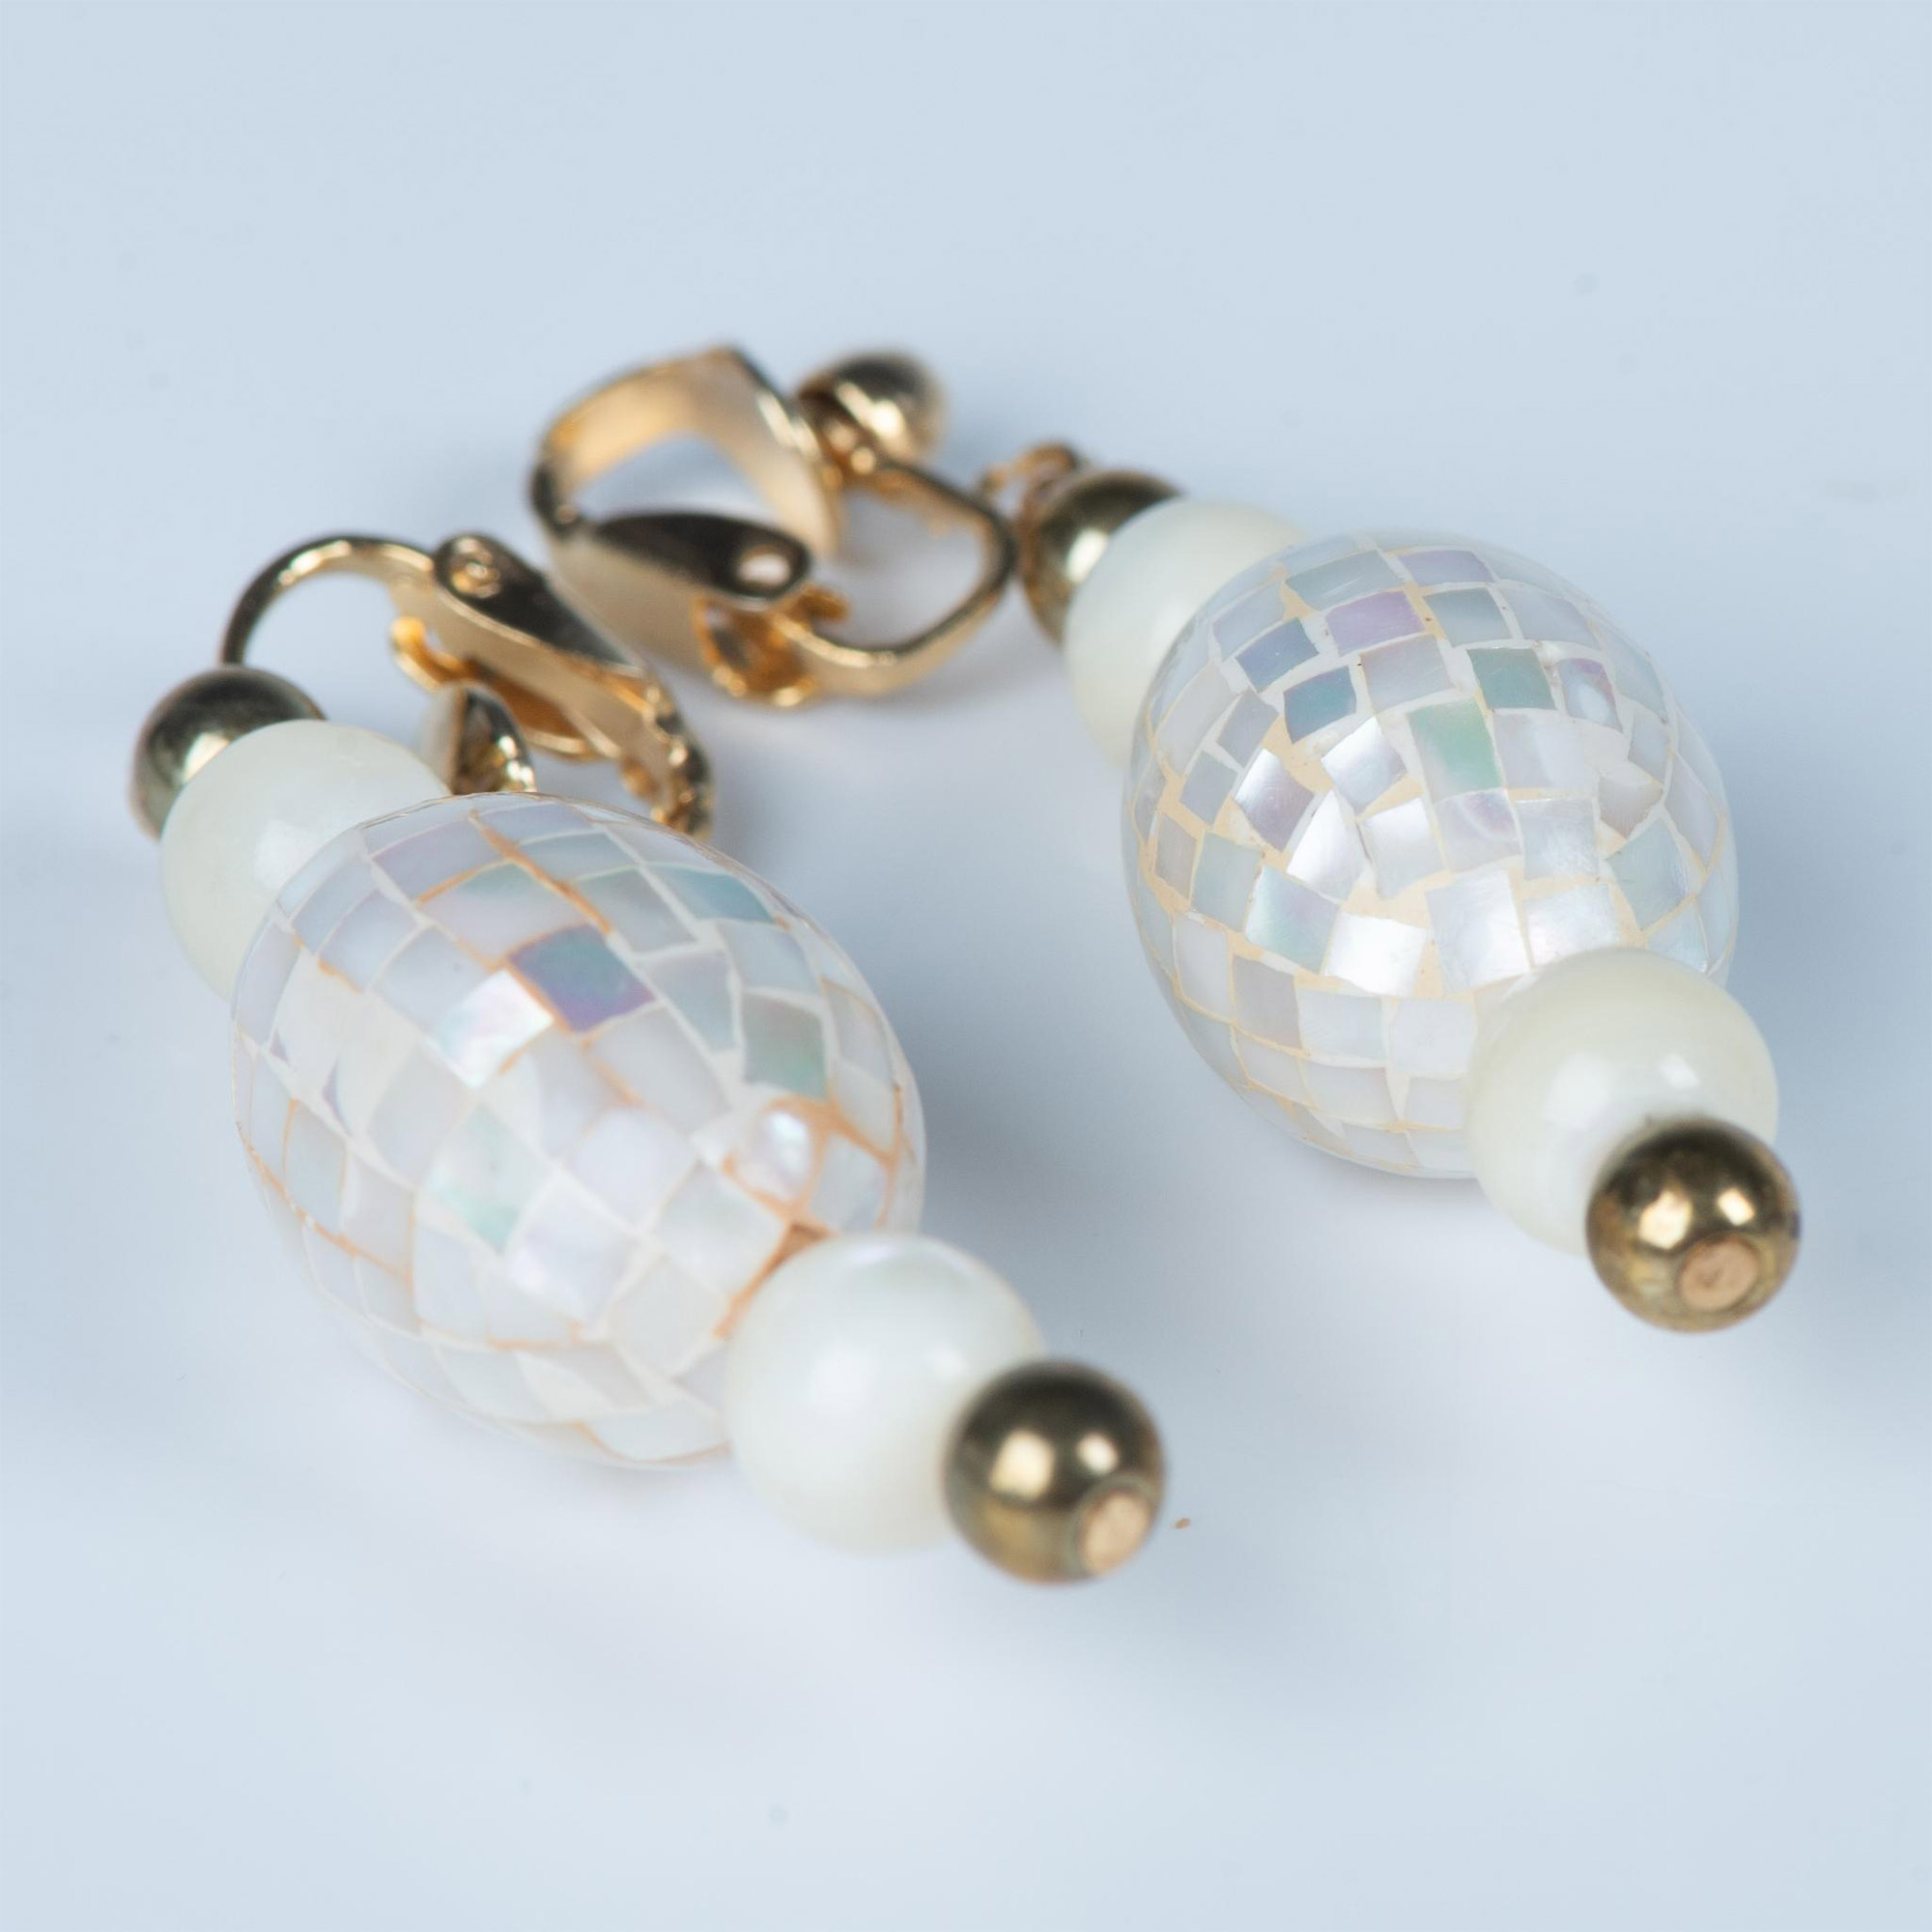 3 Pairs of Creamy Color Earrings - Image 5 of 5